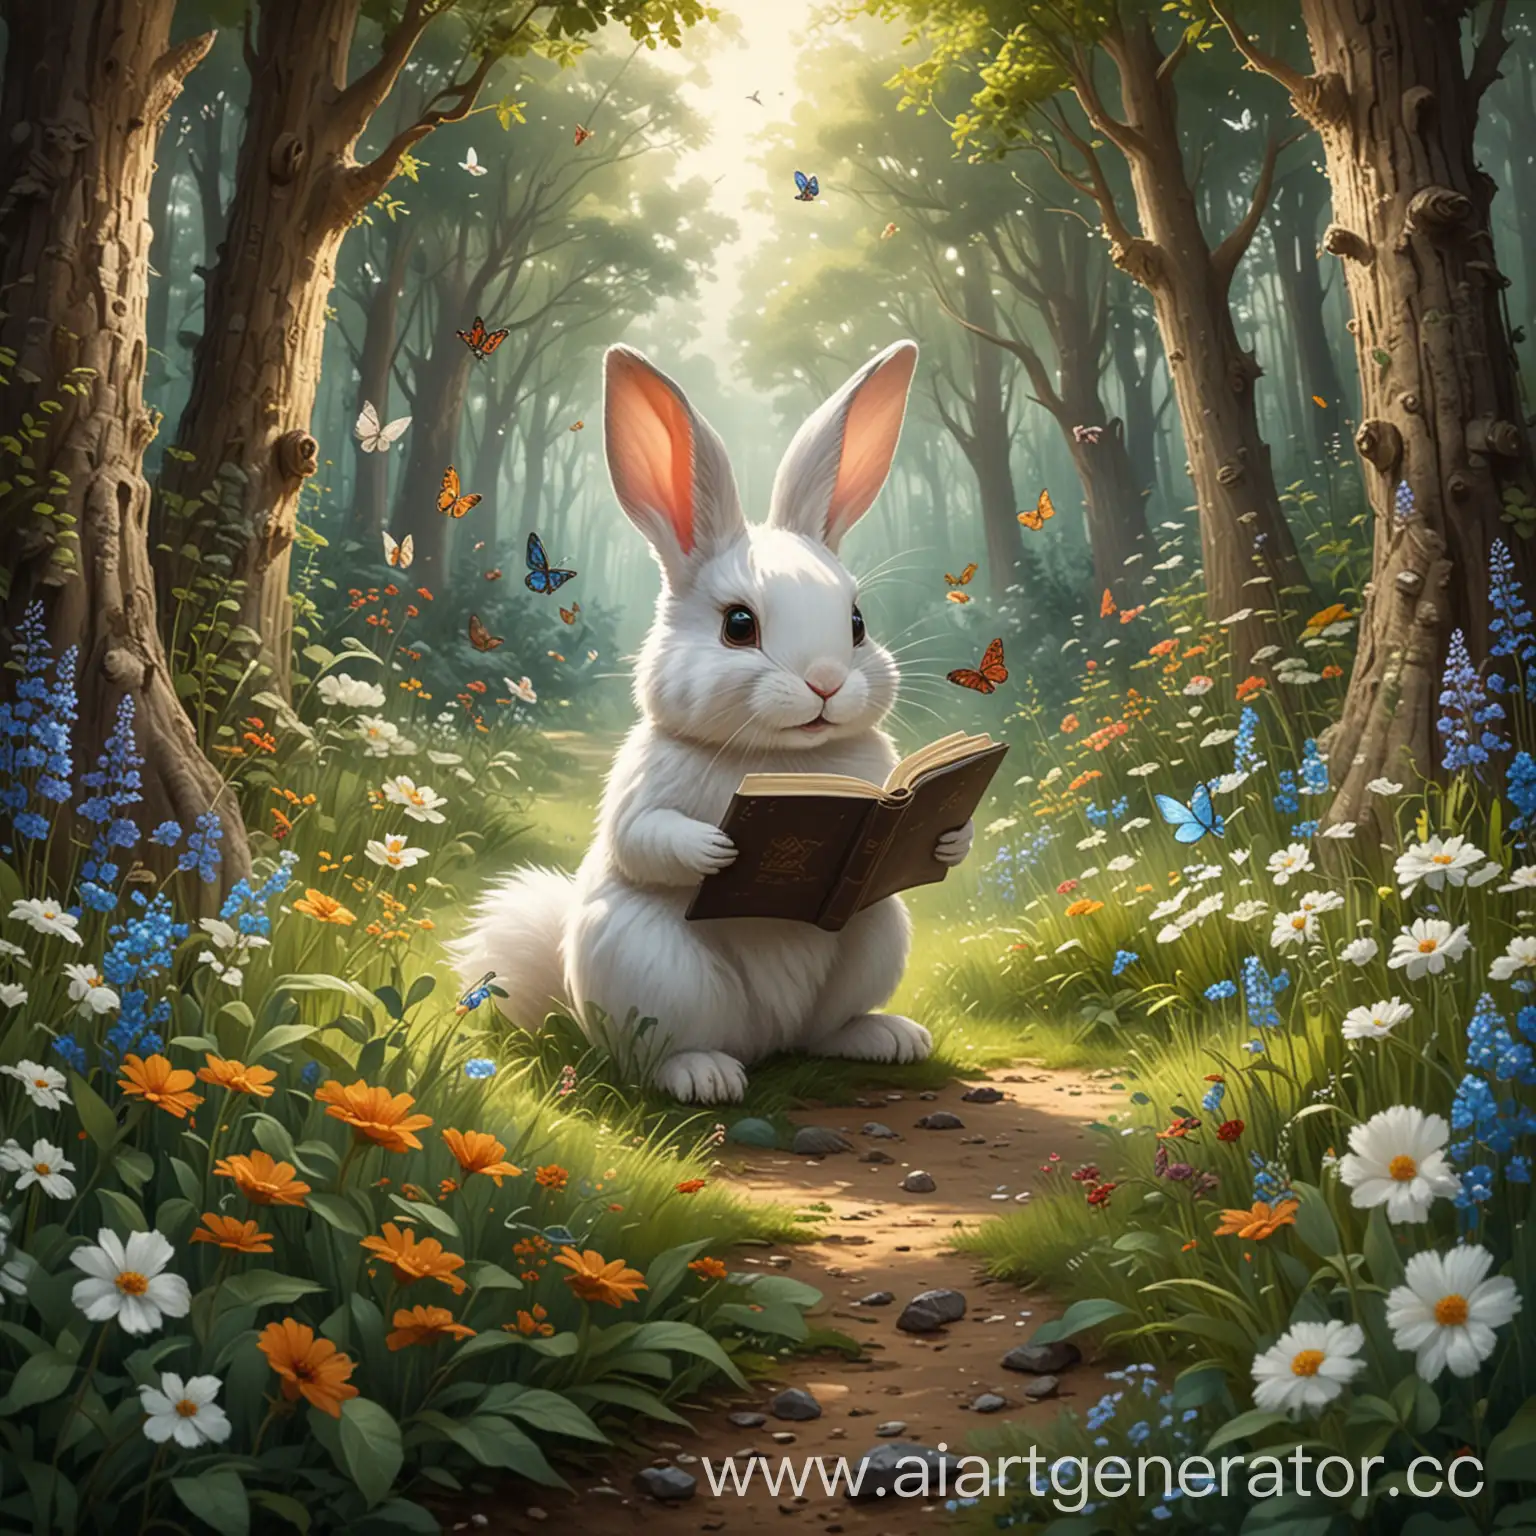 Creating an illustration for the painting "Enchanted Forest Landscape" with tall trees, lush bushes, and a small meadow covered in flowers. In the center of the clearing, depict an adorable fluffy rabbit with soft, shimmering white fur, sitting and reading a book. Show its long ears twitching as if picking up the sounds of the forest, as well as bright butterflies fluttering around the rabbit and curious squirrels peeking out from behind the bushes. Utilize detailed oil painting with oil brush strokes, sharp focus, dynamic lighting, and create an intricate, high-quality work.